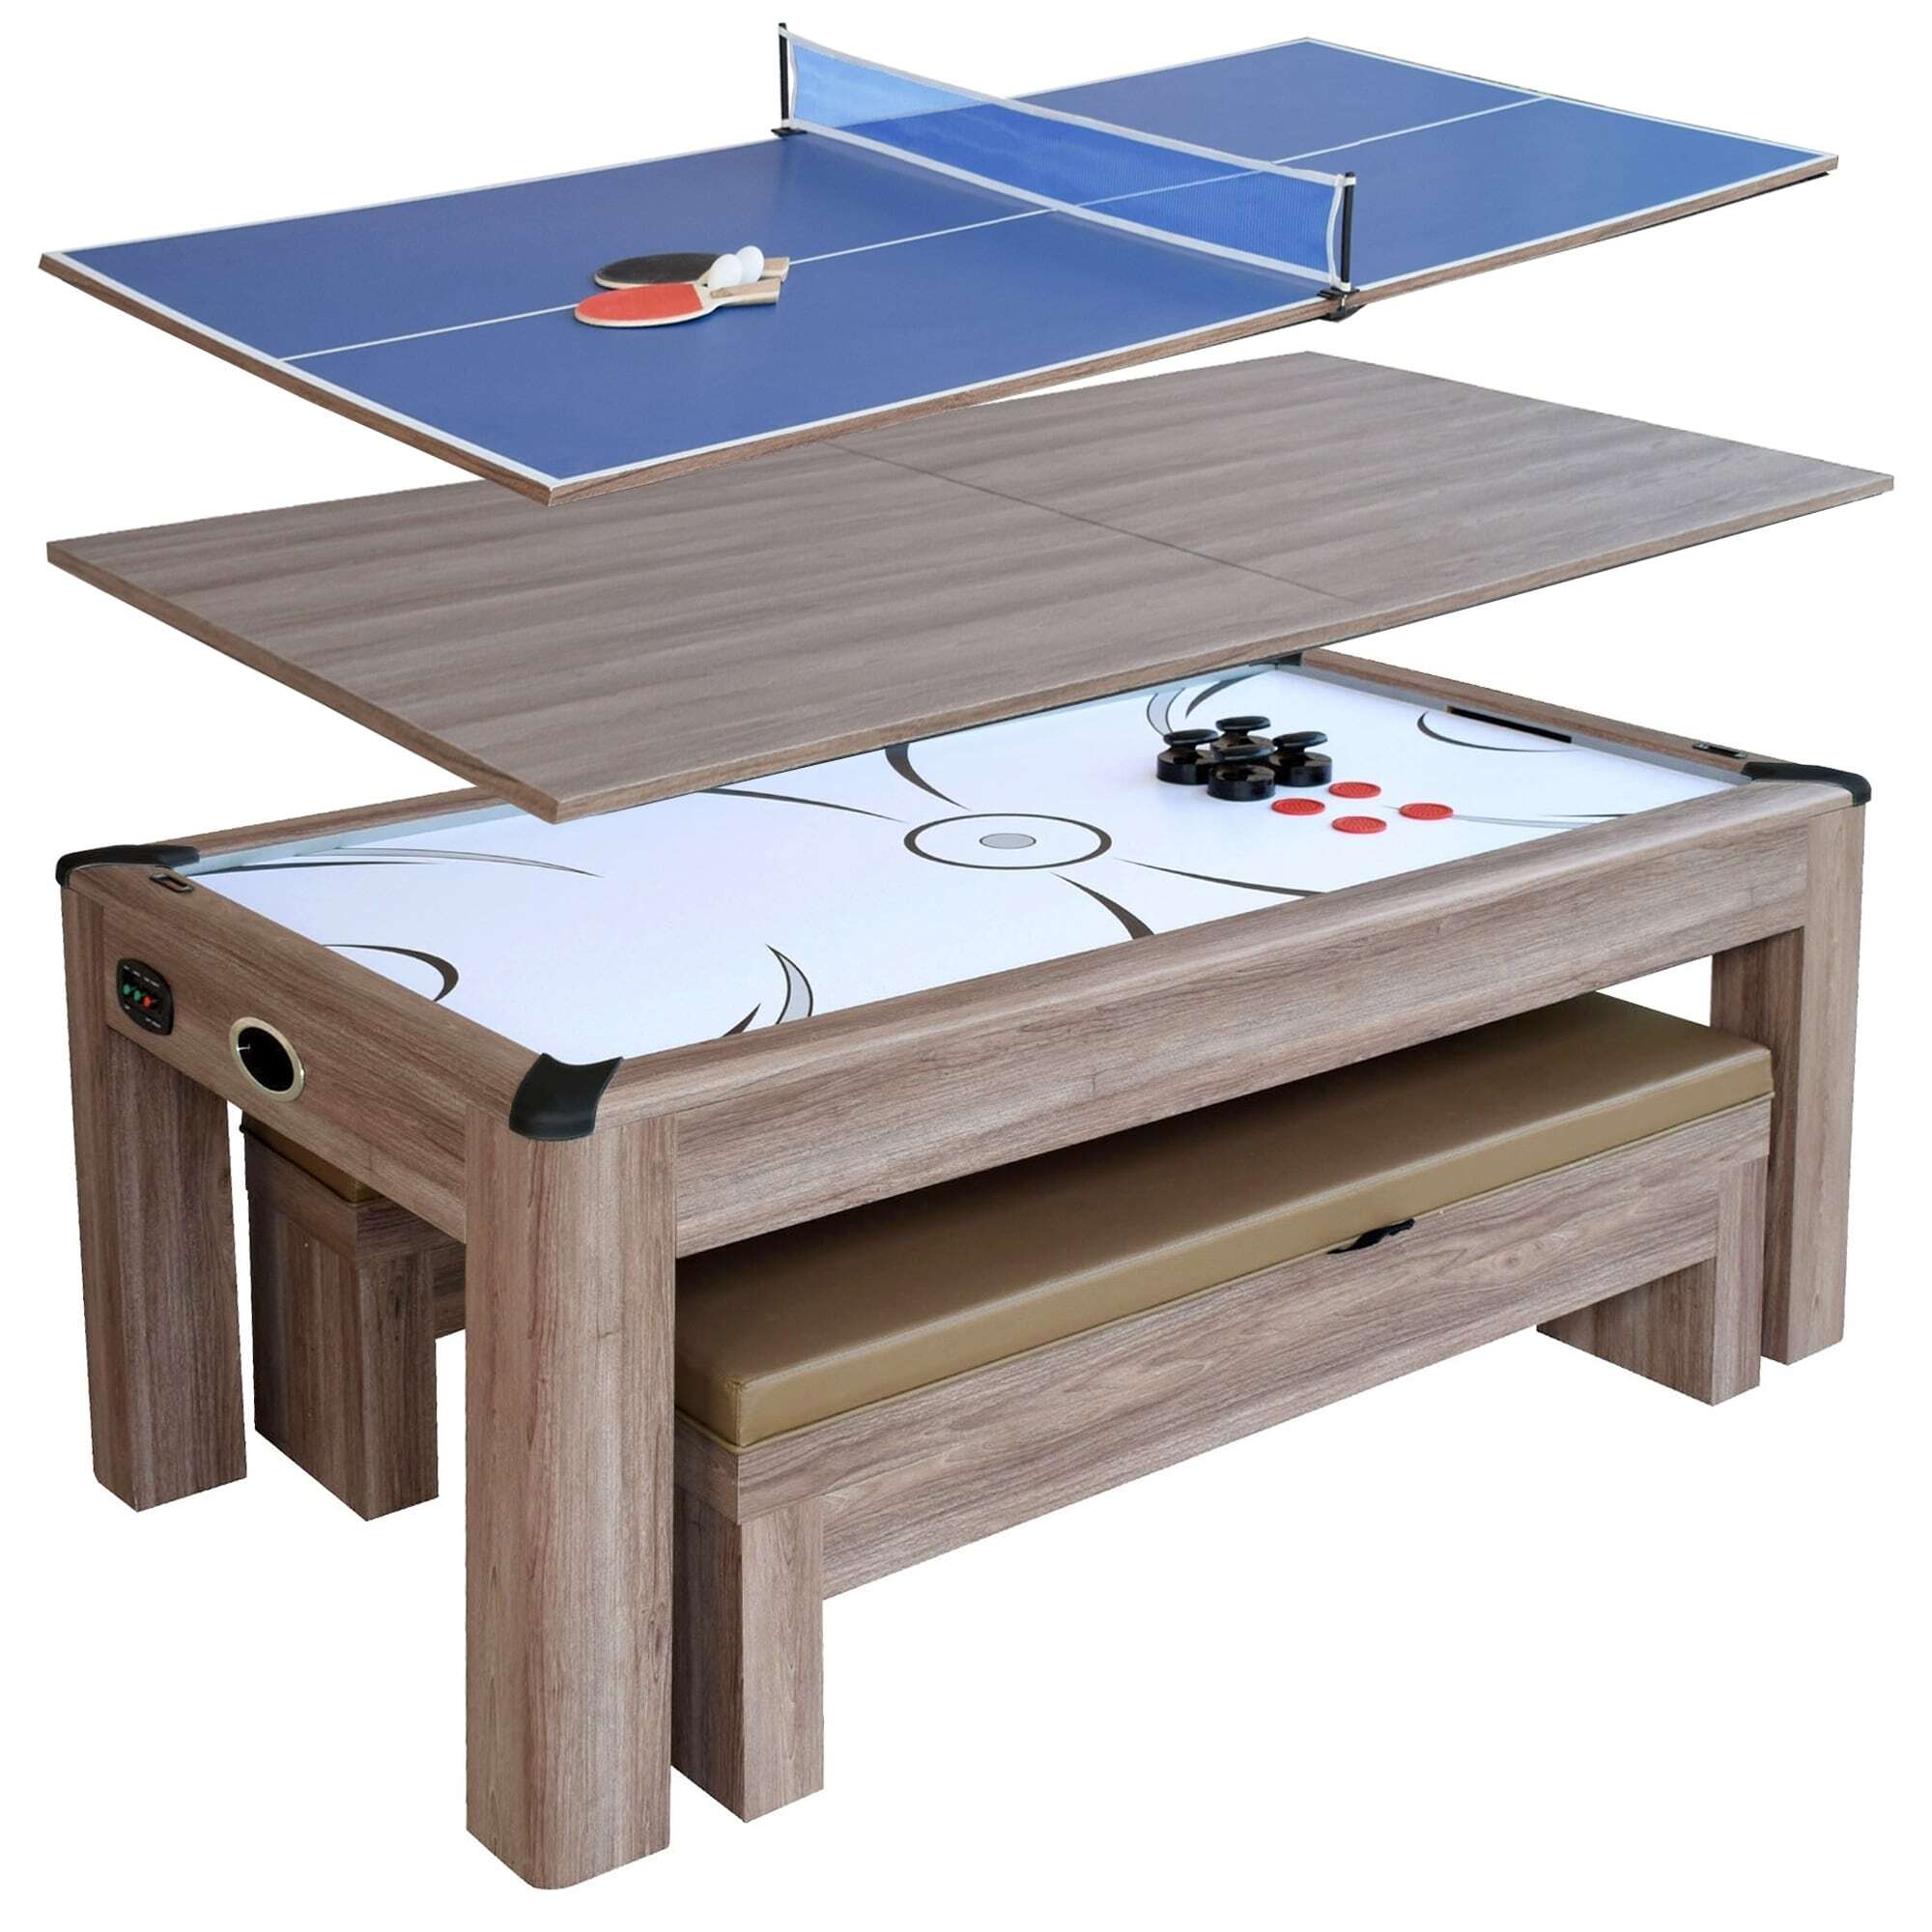 Driftwood 7 ft Air Hockey Table Combo Set w/Benches